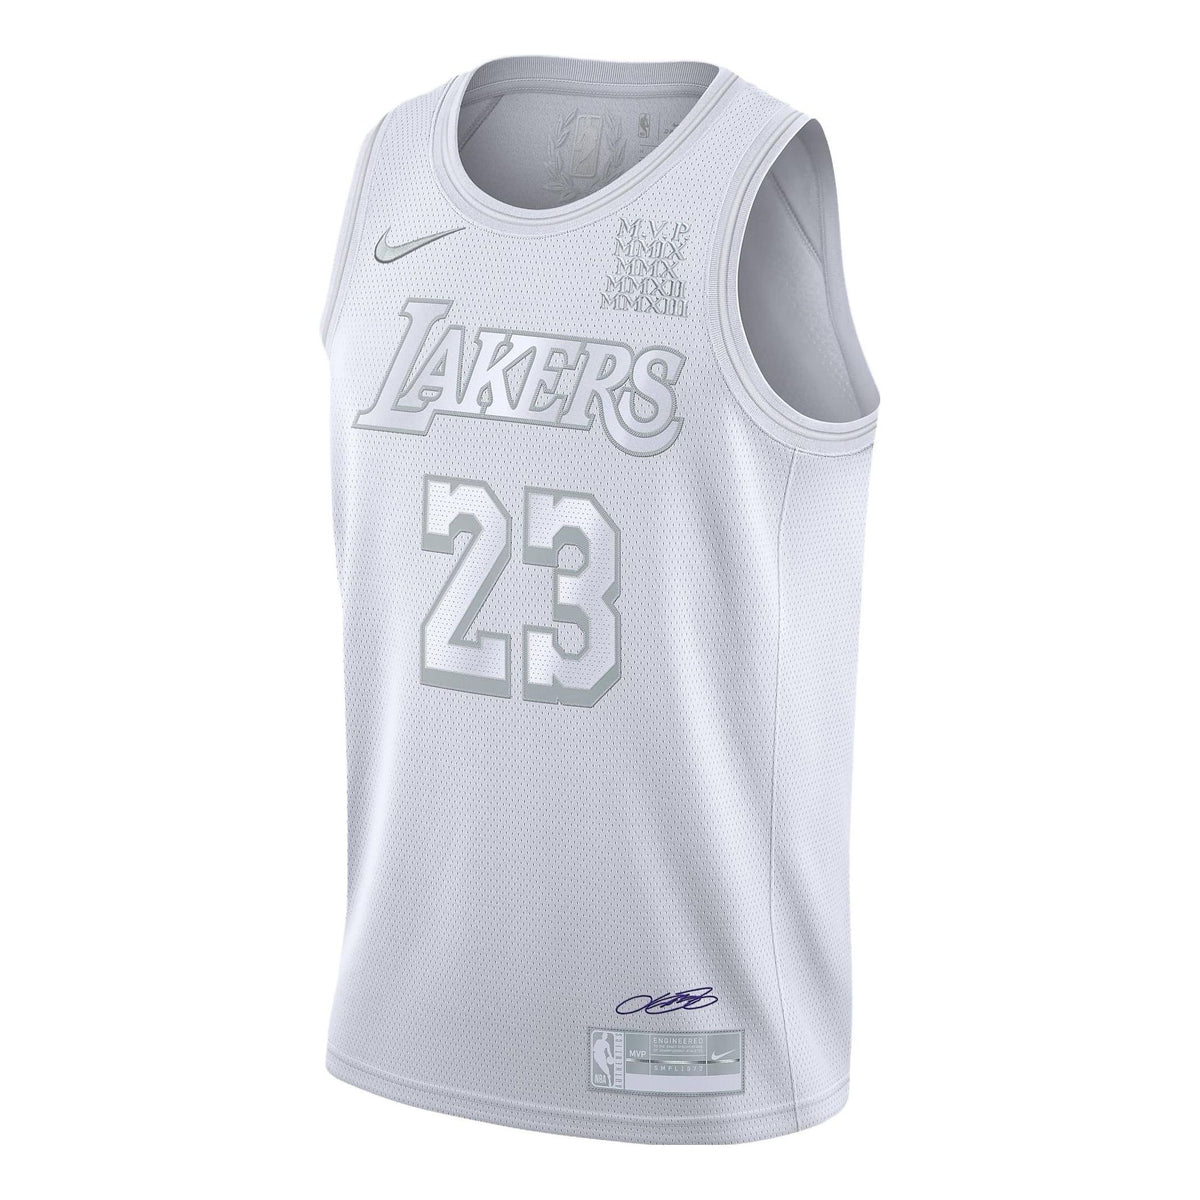  Lebron James Jersey: Clothing, Shoes & Jewelry